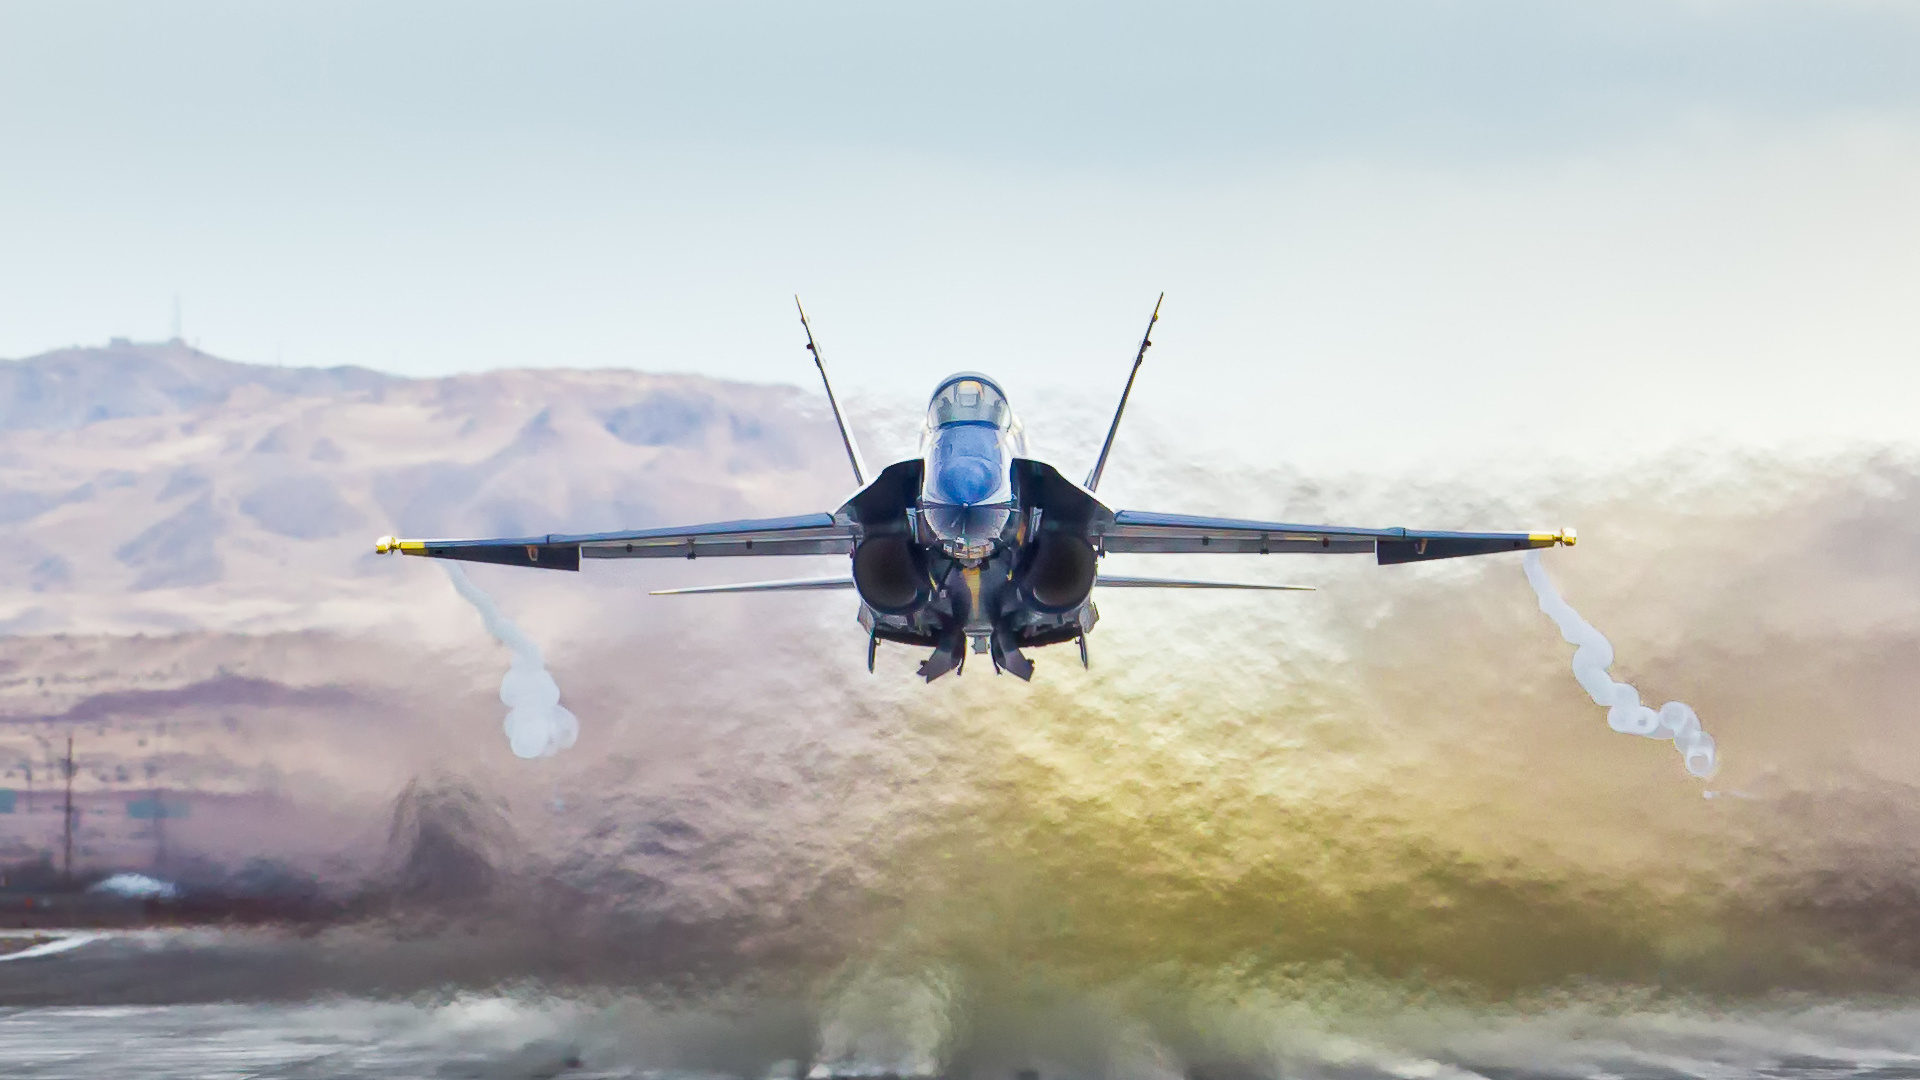 Military McDonnell Douglas F/A-18 Hornet HD Wallpaper | Background Image